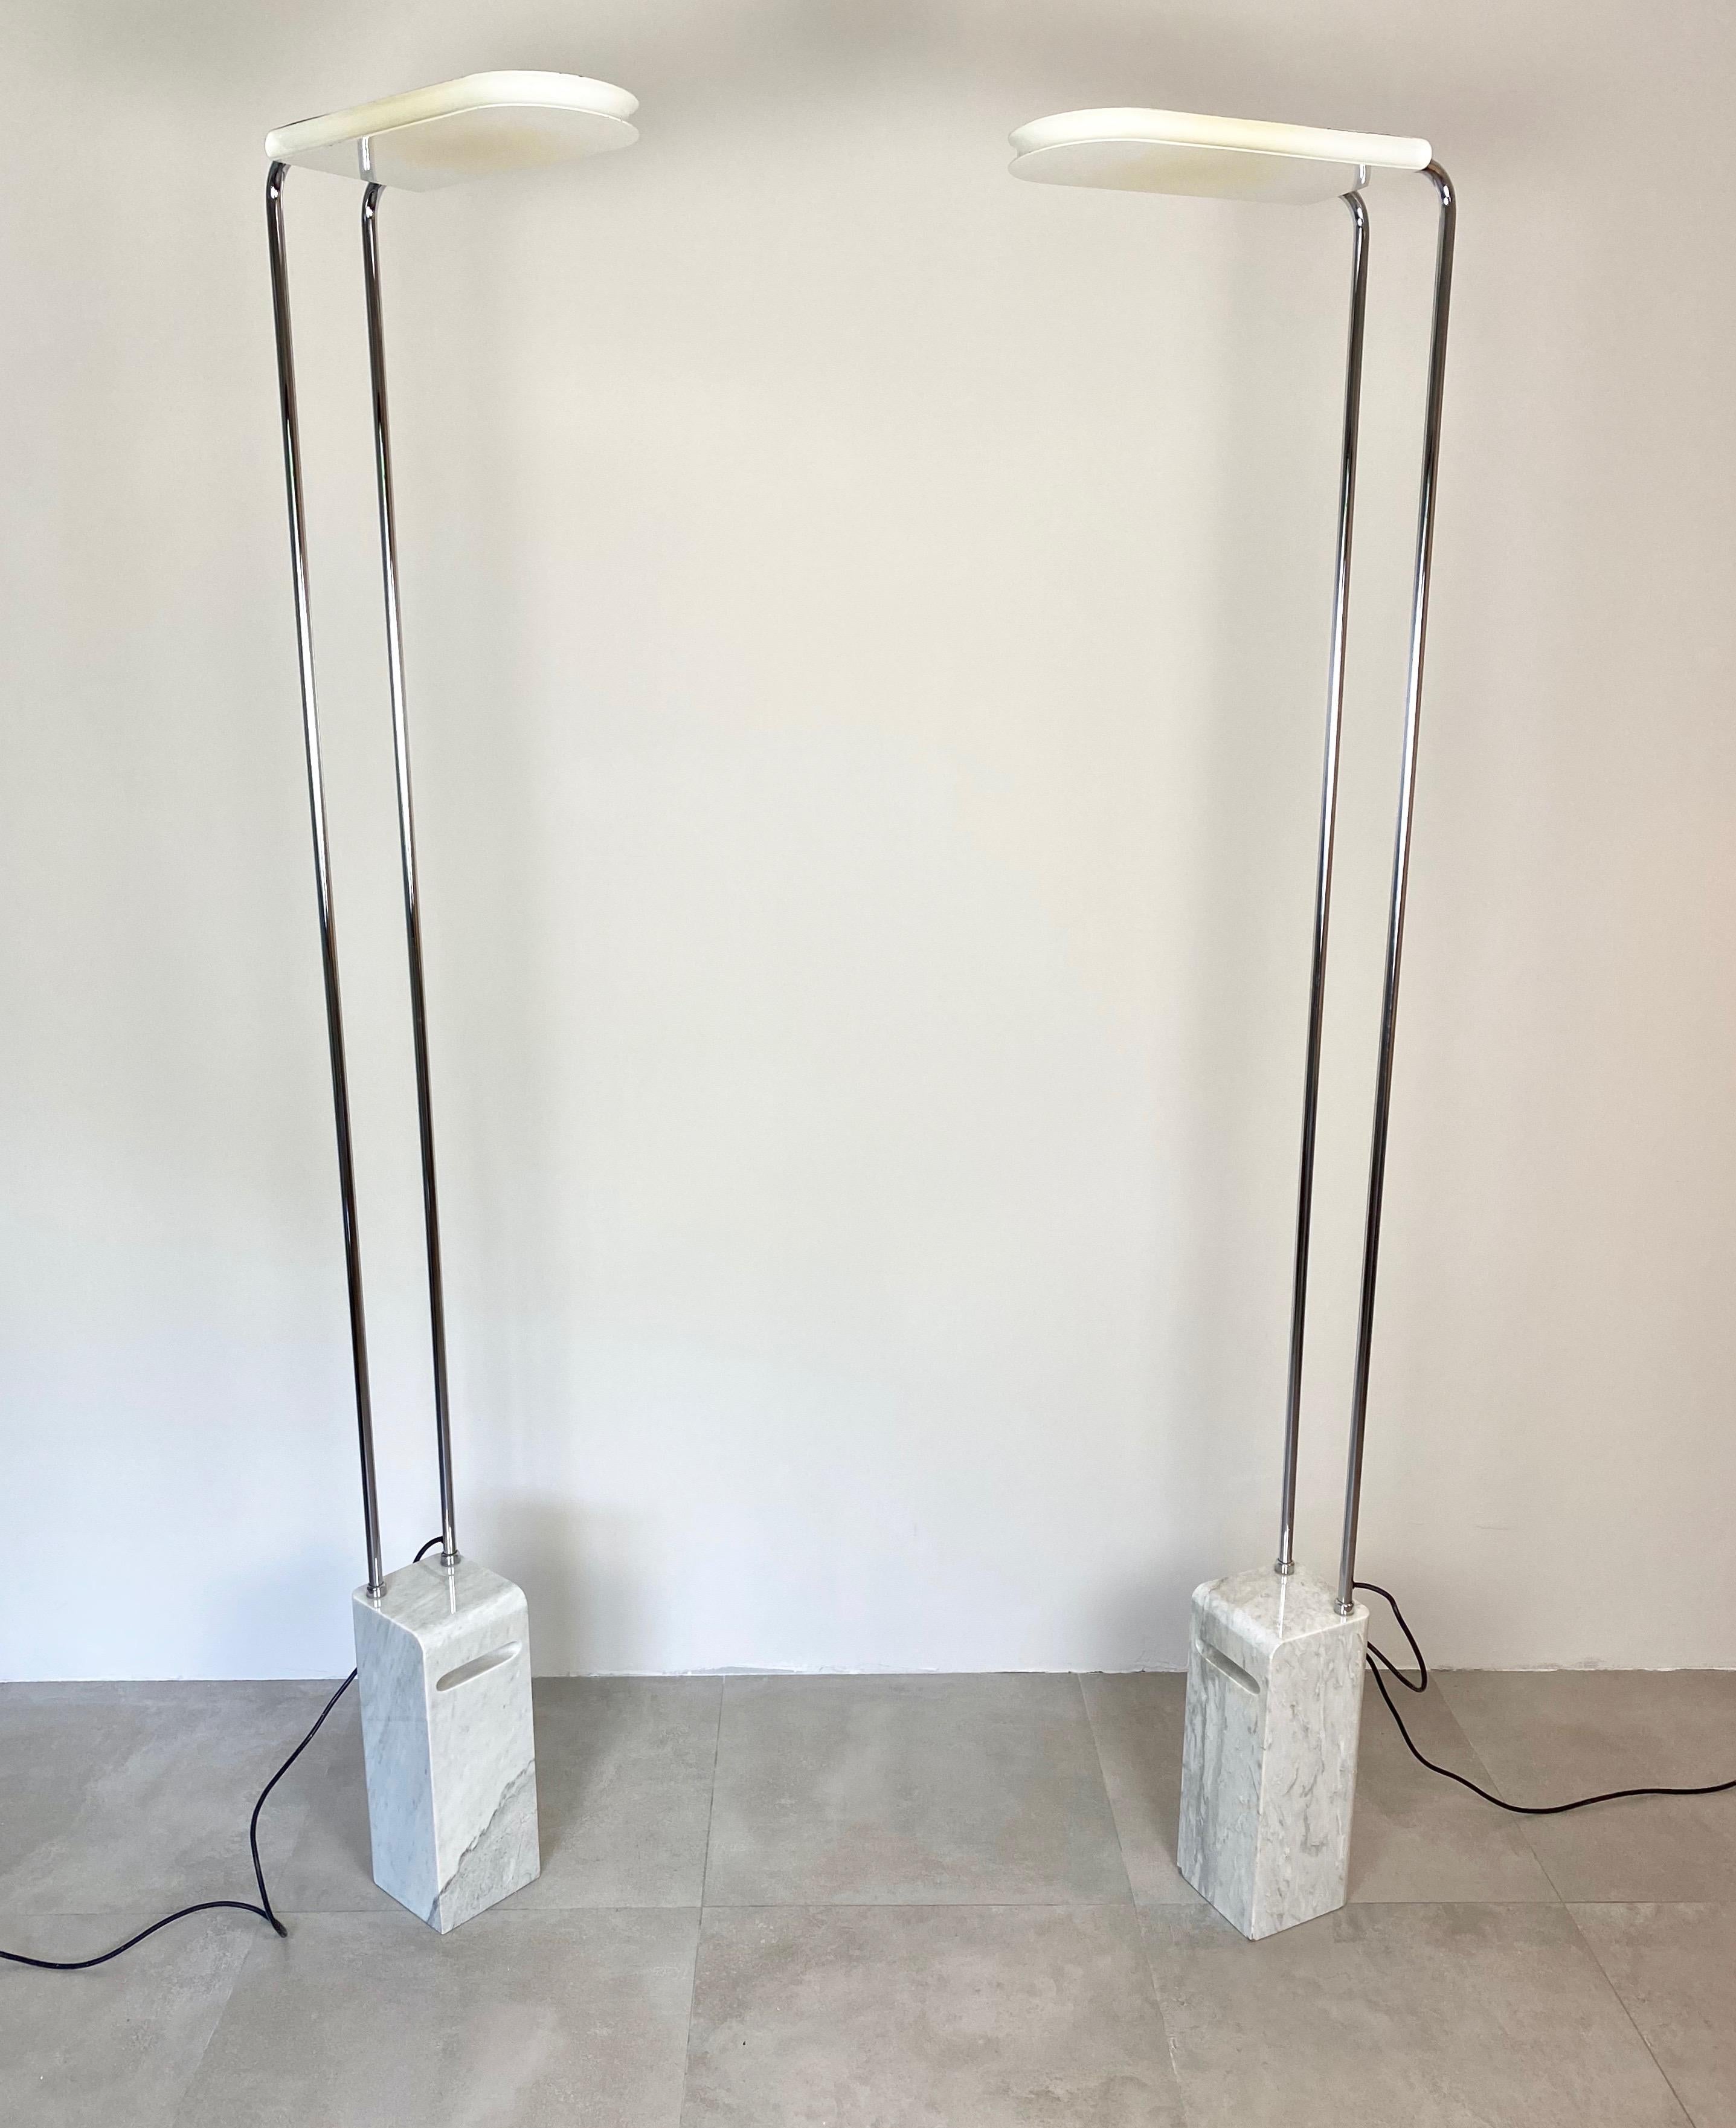 Mid-Century Modern Pair of Gesto Floor Lamp Marble Chrome by Bruno Gecchelin Skipper, Italy, 1970s For Sale